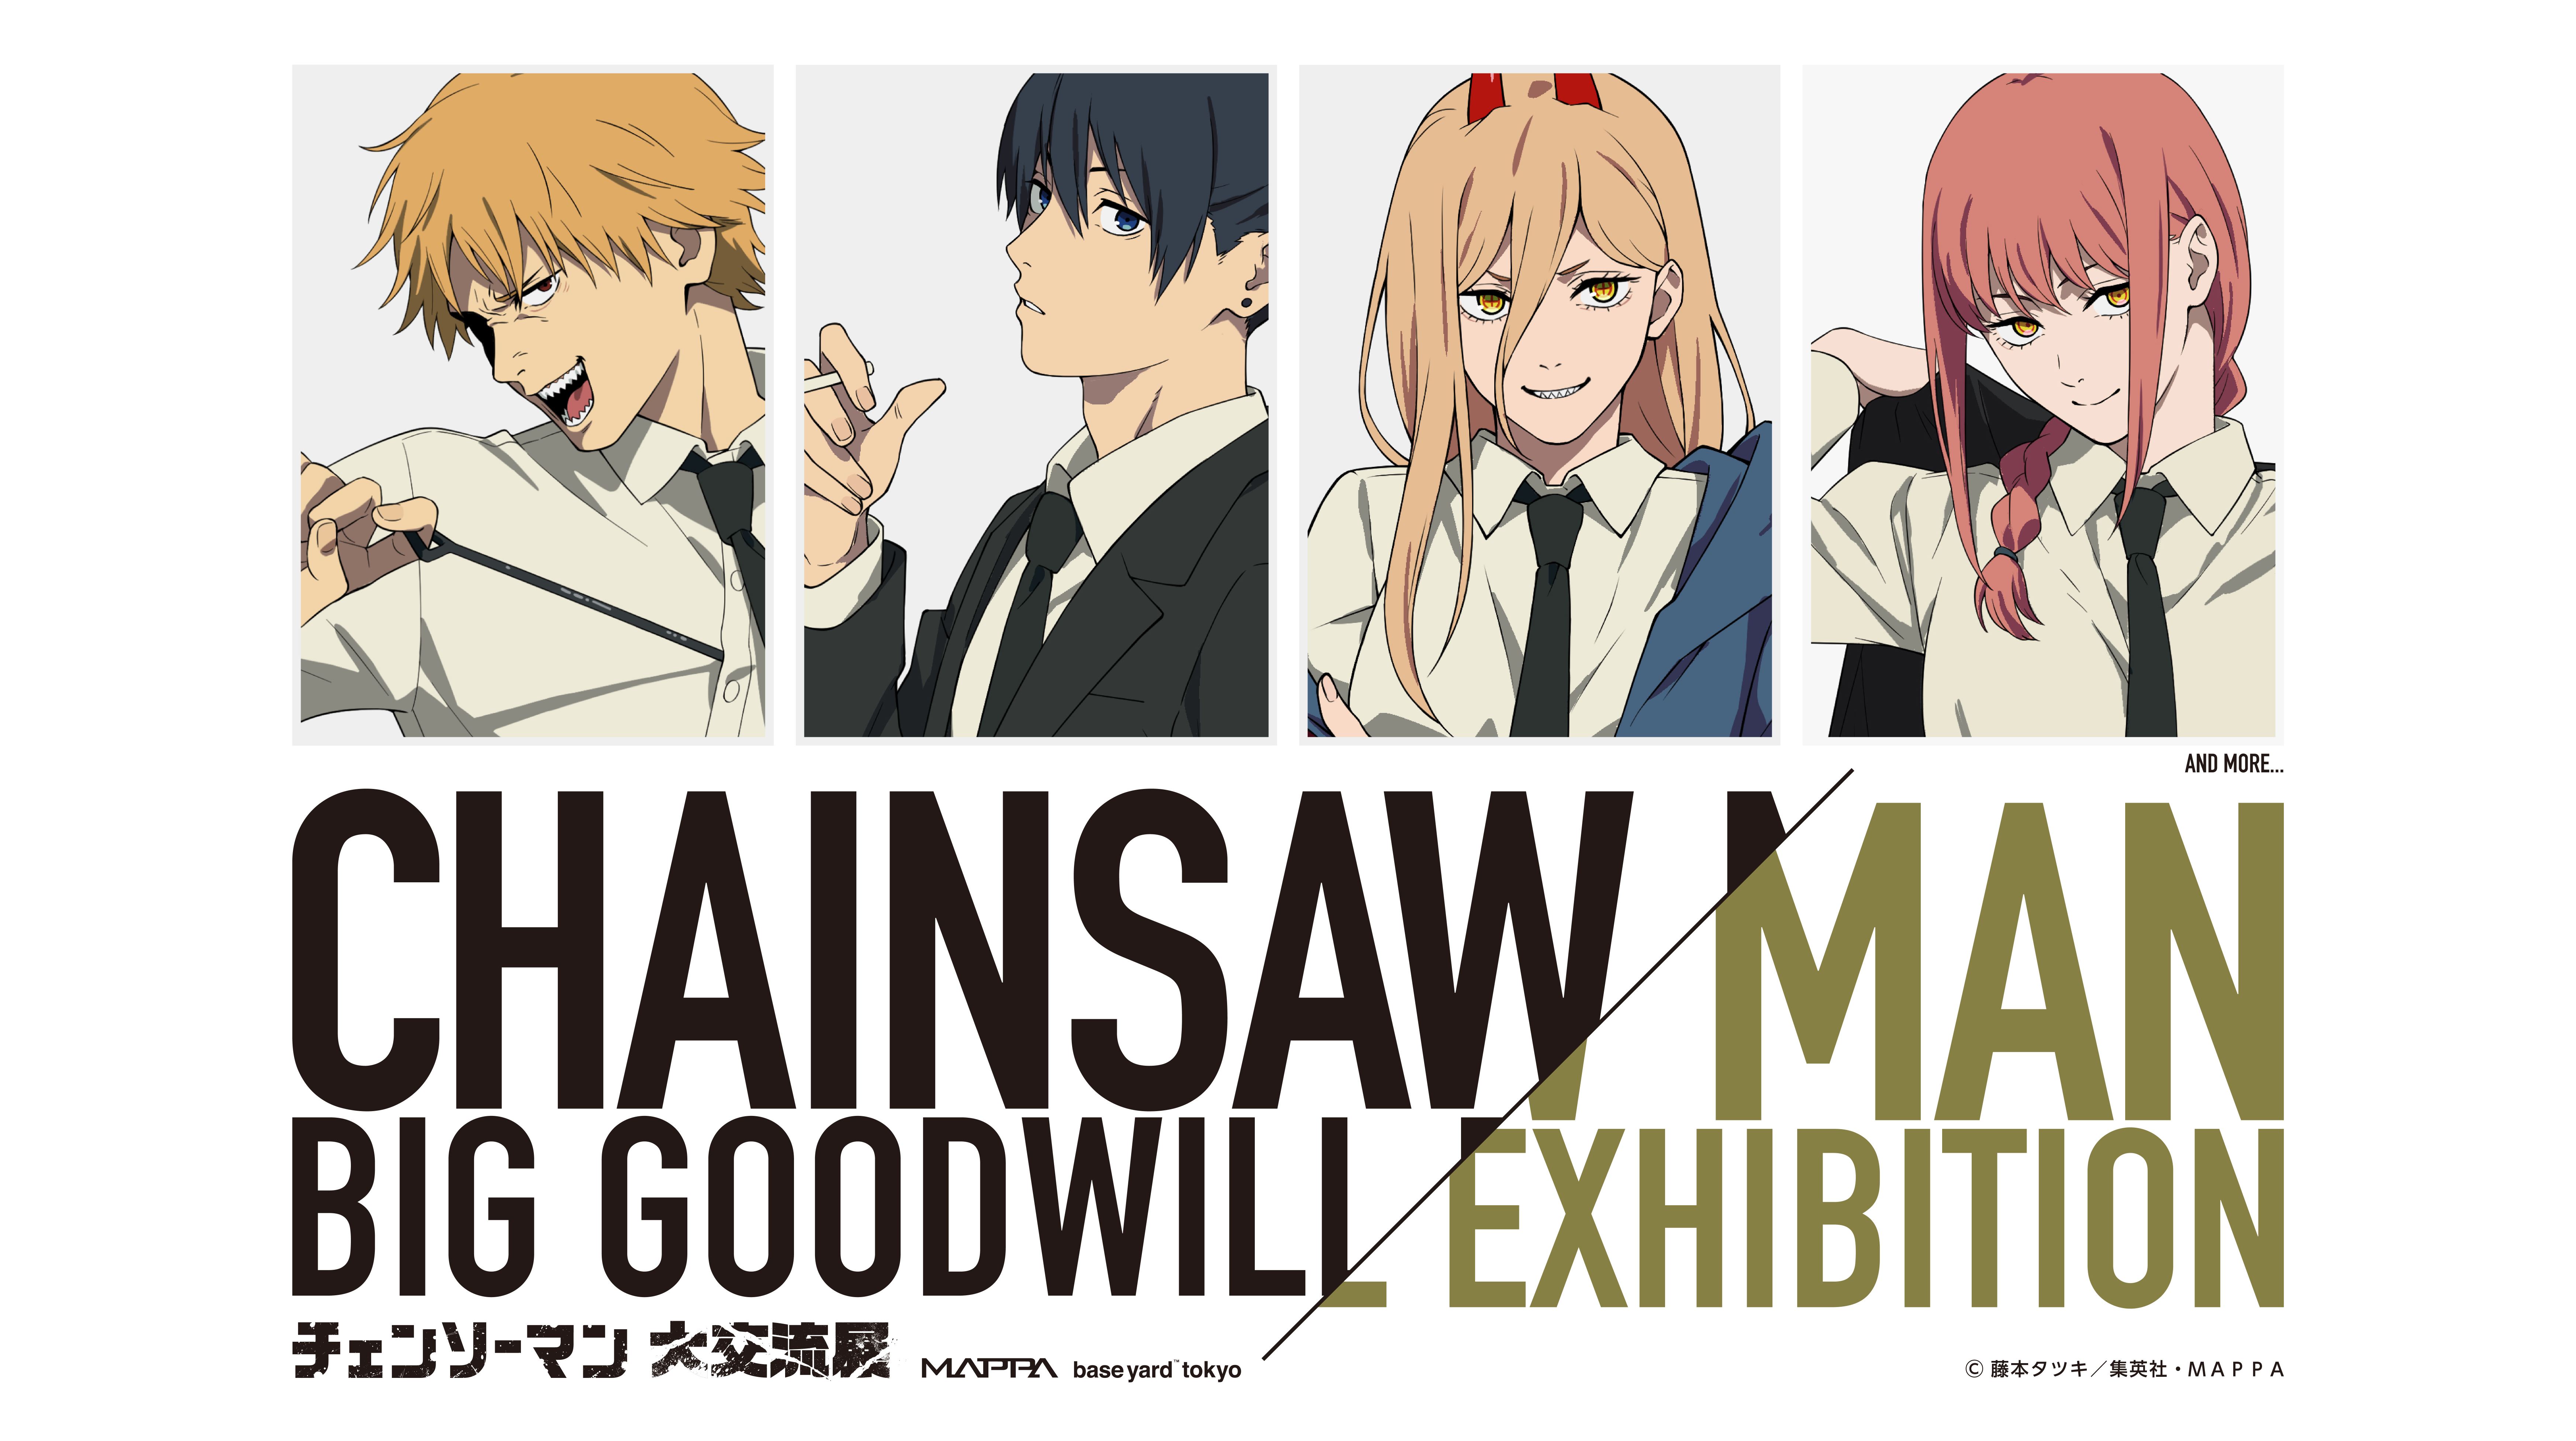 Enjoy Chainsaw Man Manga Commercial on Japanese Trains Until